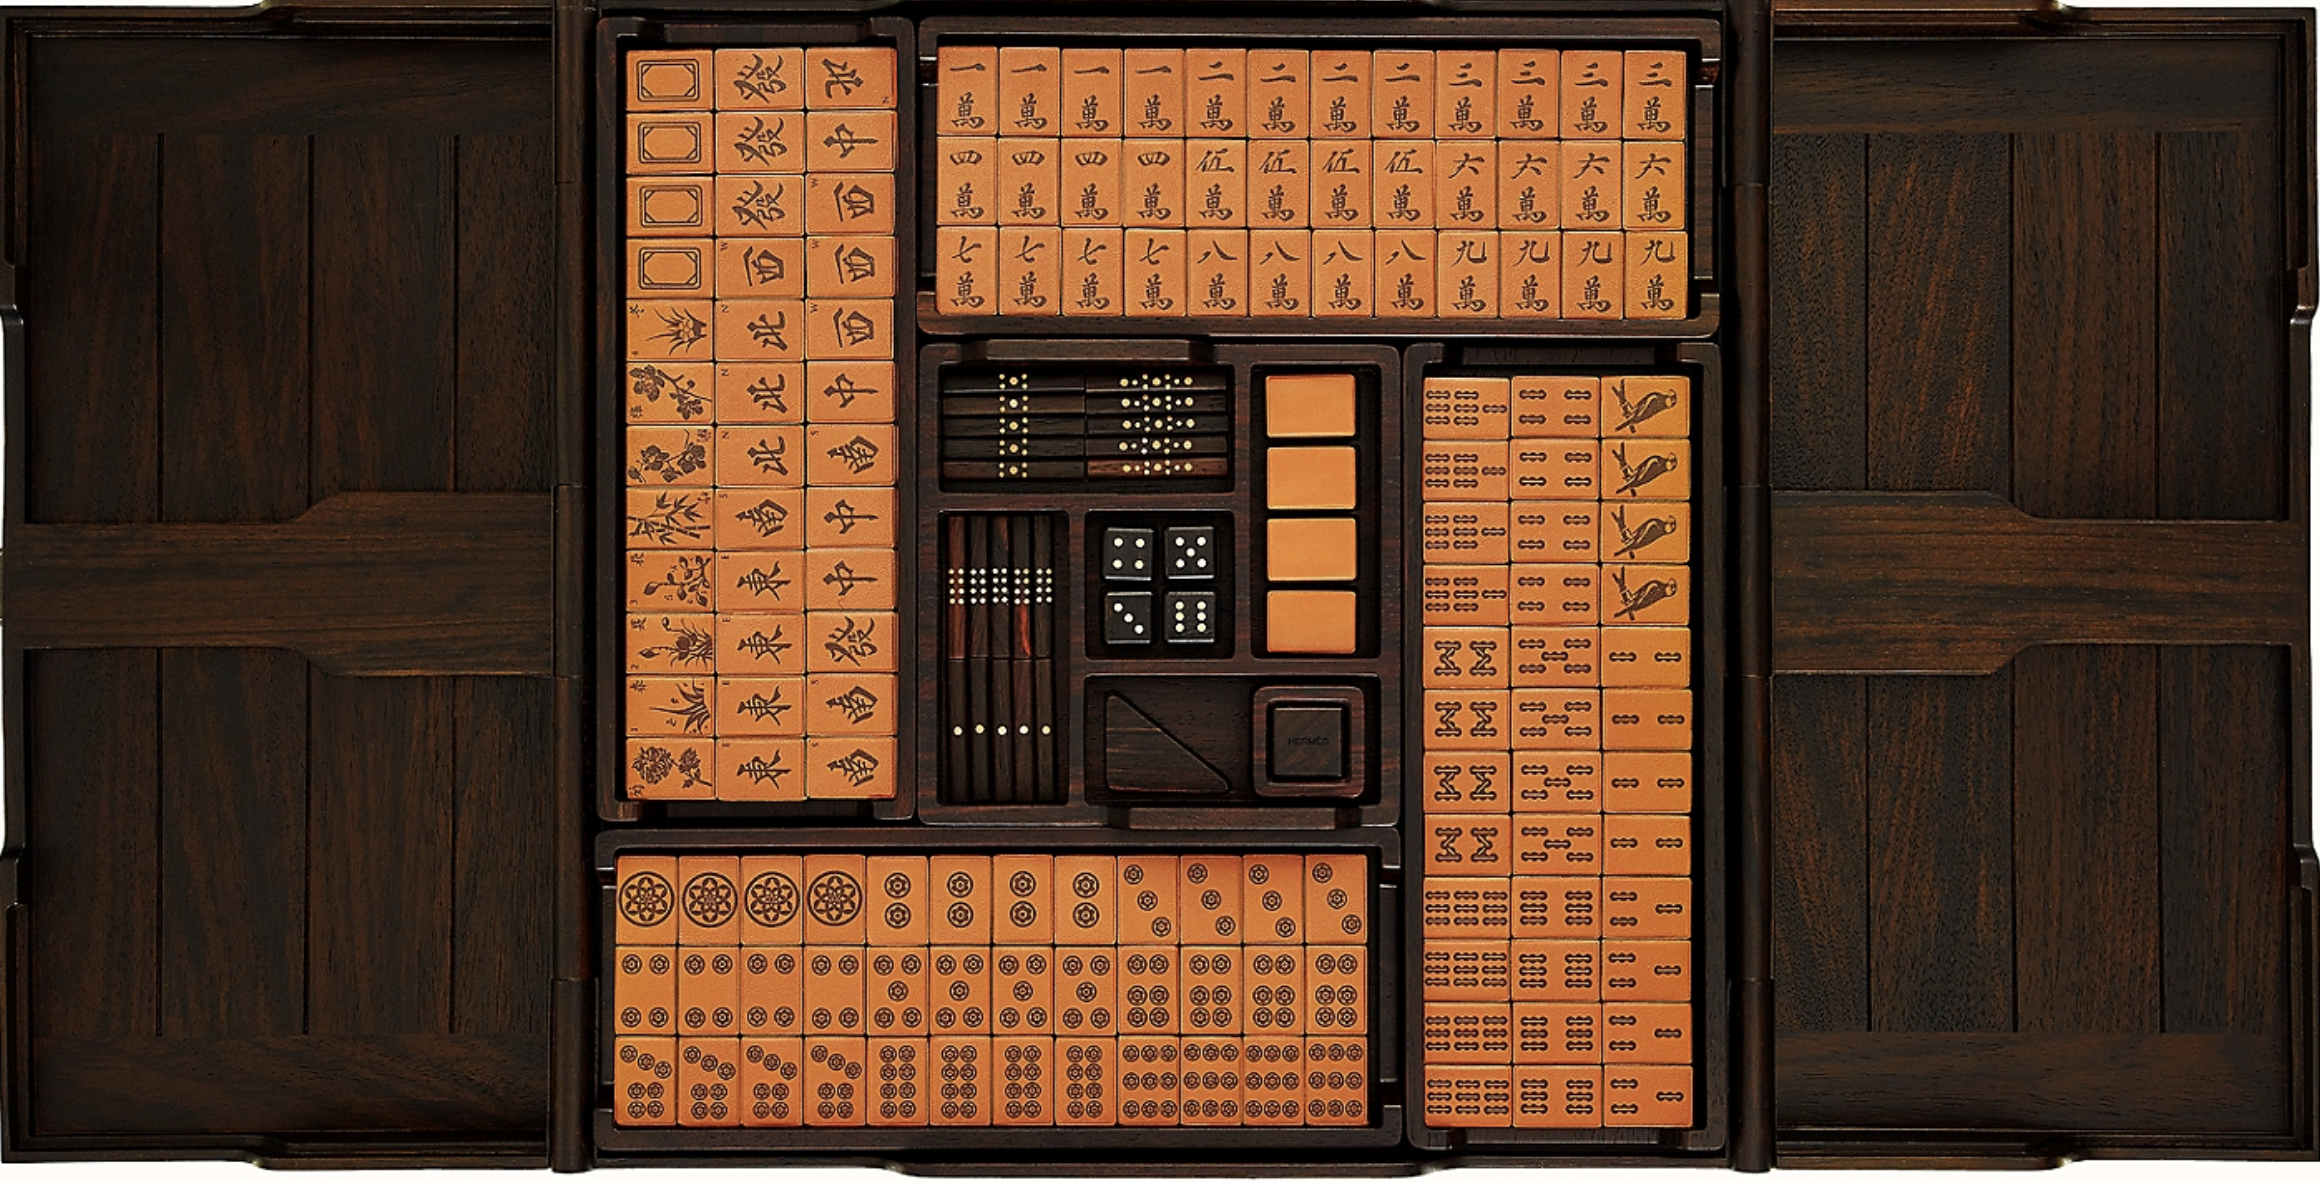 Hermes 'solid palissander wood' mahjong set available in S'pore for  S$57,200 -  - News from Singapore, Asia and around the world